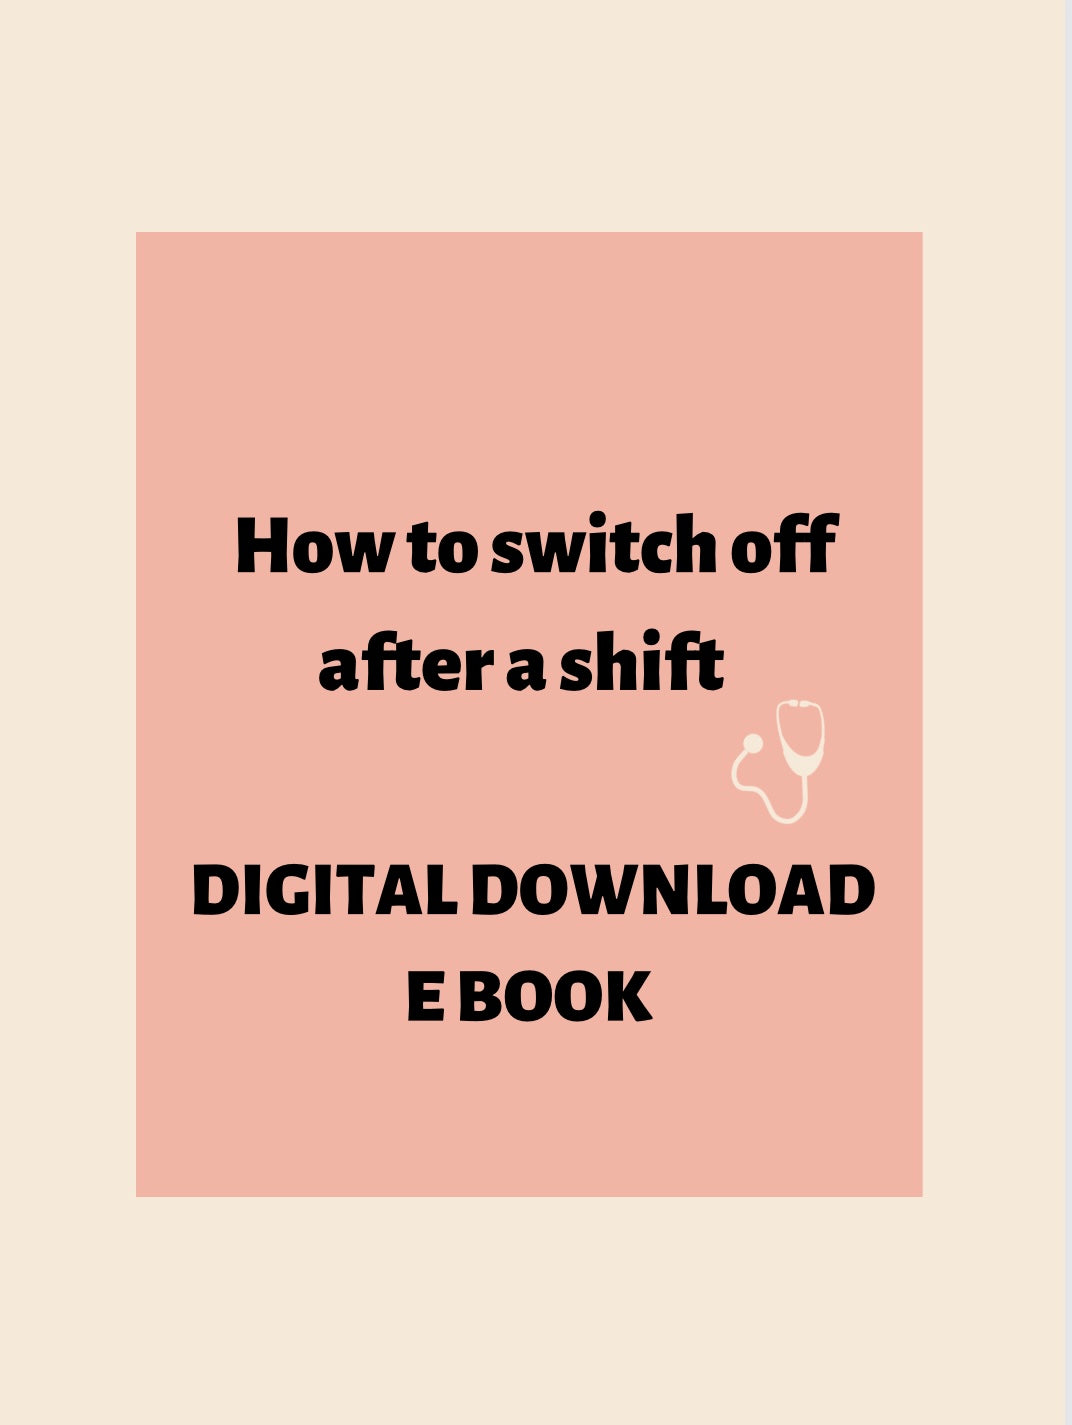 How to Switch off after a shift (E BOOK)